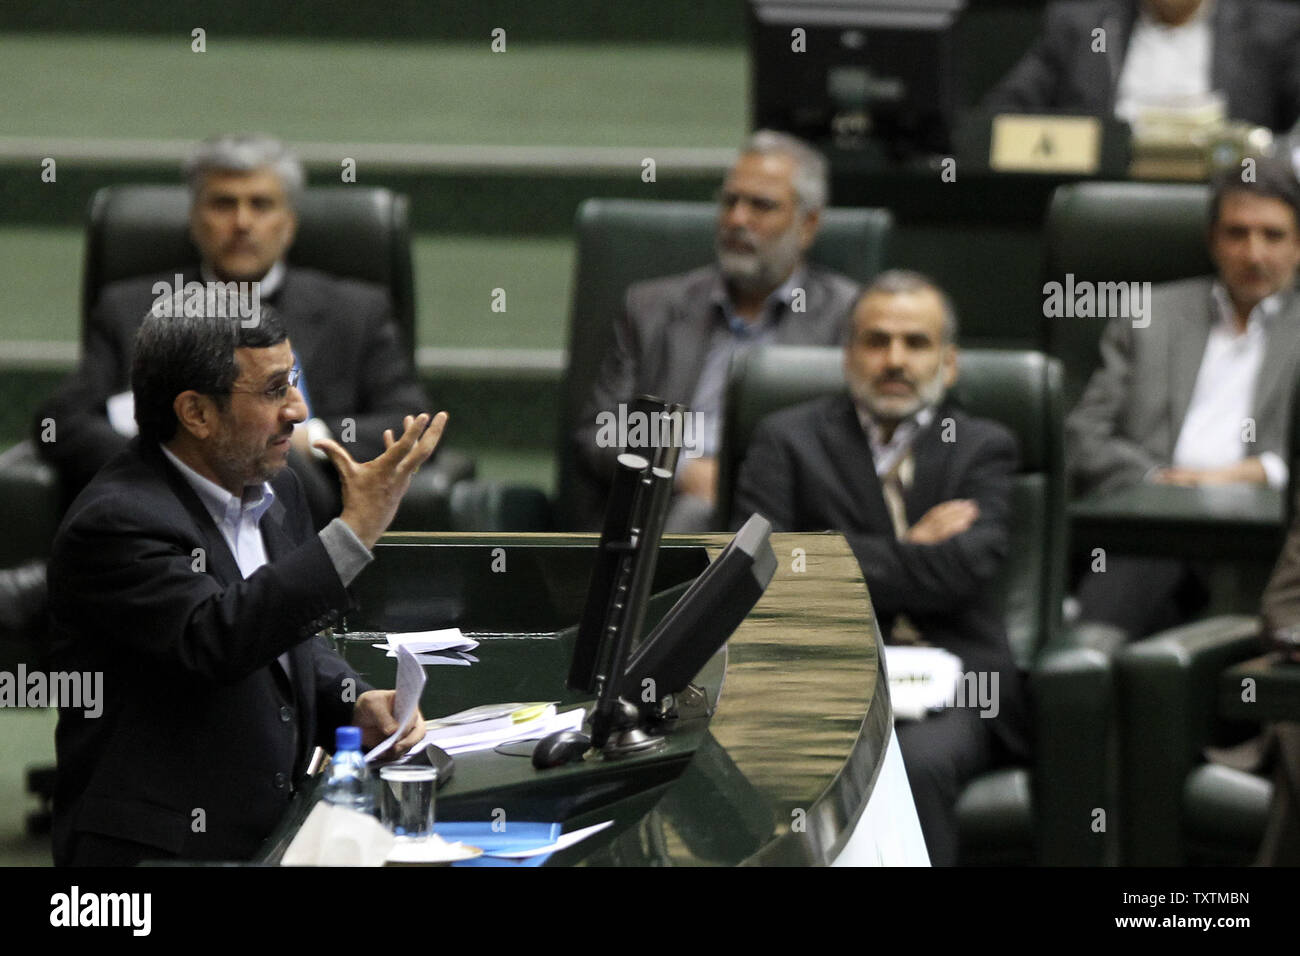 Iranian President Mahmoud Ahmadinejad speaks during the impeachment of labor minister Abdolreza Sheikholeslami, unseen, at the parliament in Tehran, Iran on February 3, 2013. Out of 272 lawmakers in the parliament on Sunday, 192 voted against the labor minister. The main reason behind the MP's decision to dismiss the minister was Sheikholeslami's refusal  to remove former Tehran prosecutor general Saeed Mortazavi from his post as the director of the Social Security Organization.     UPI/Maryam Rahmanian Stock Photo